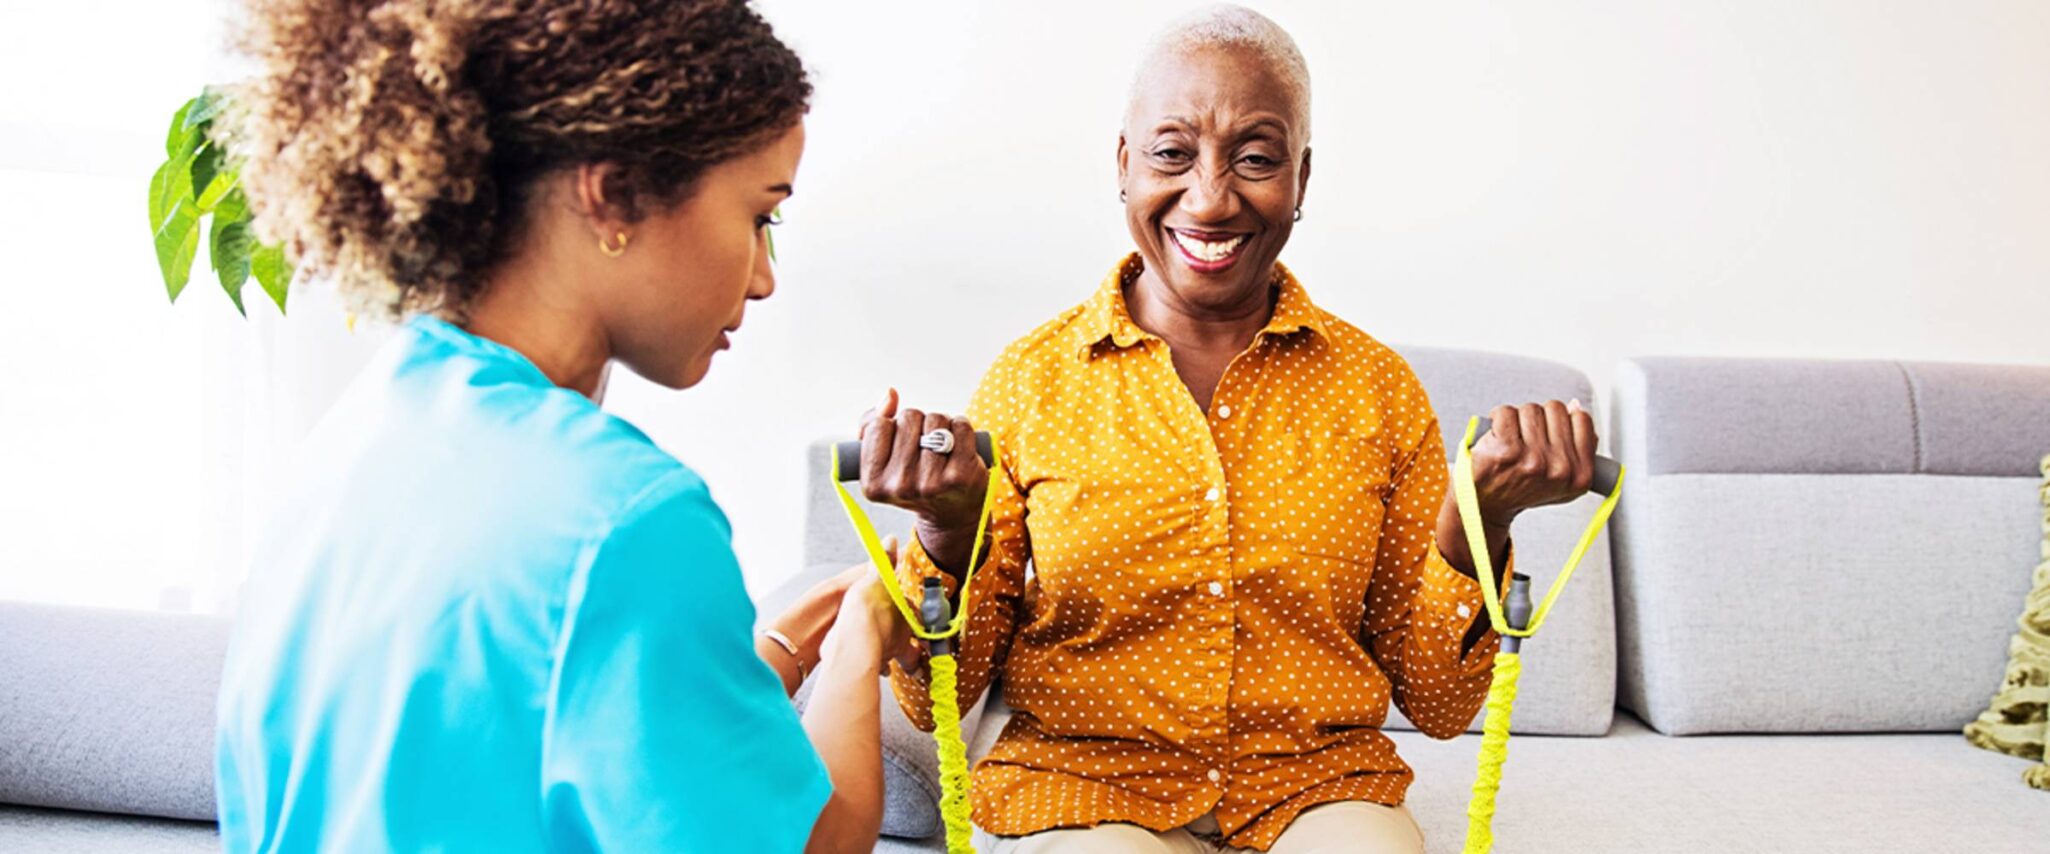 An occupational therapist meets with a senior woman